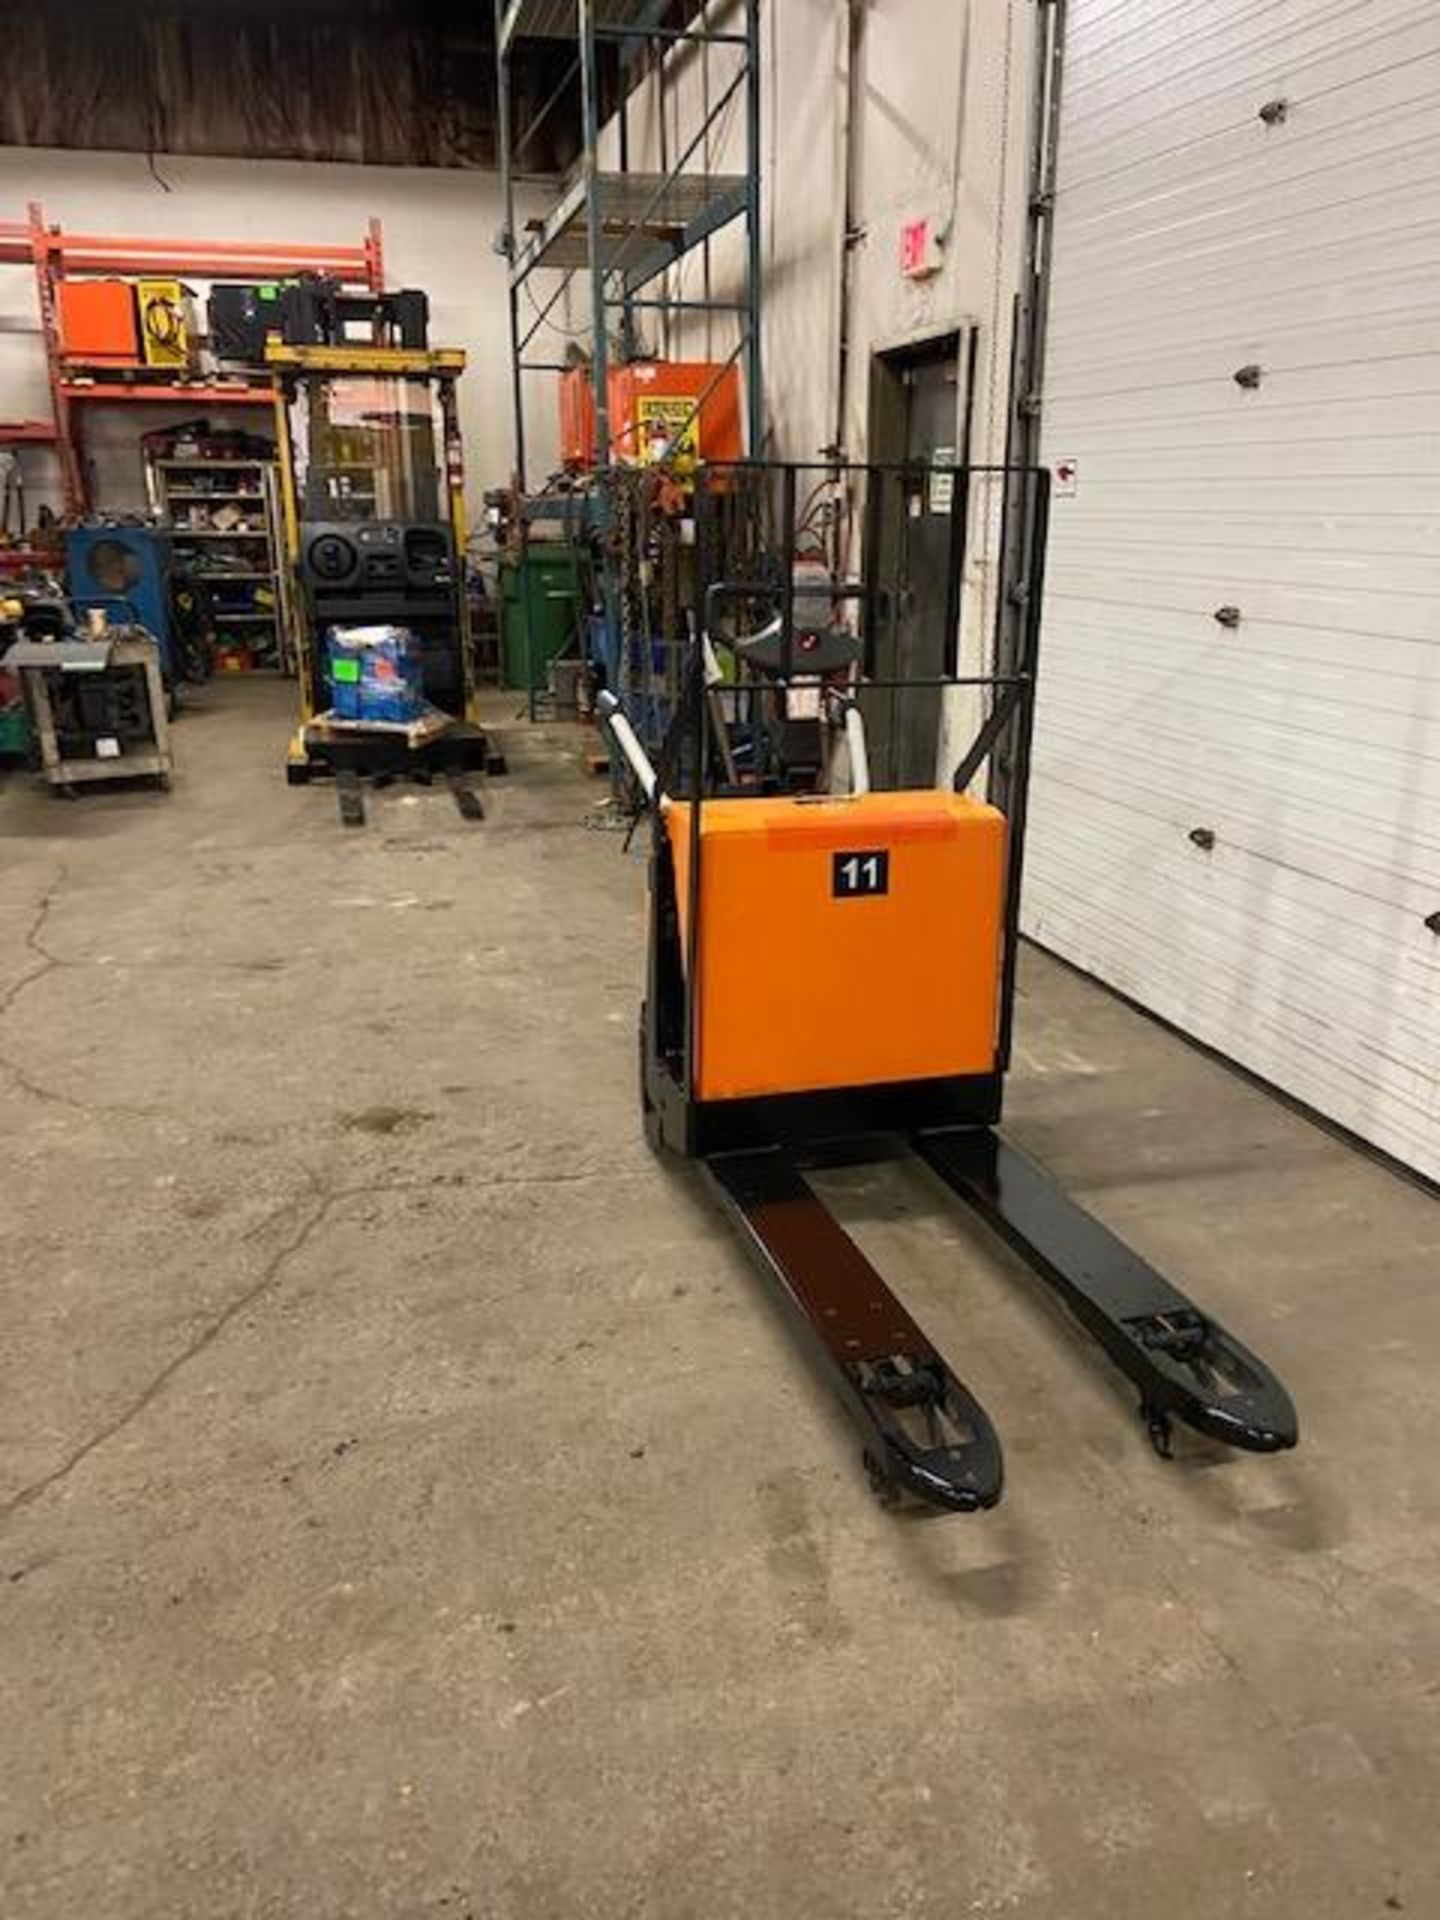 2010 BT Raymond Ride On Electric Powered Pallet Cart Walkie Lift 5000lbs capacity 48" with LOW - Image 3 of 3